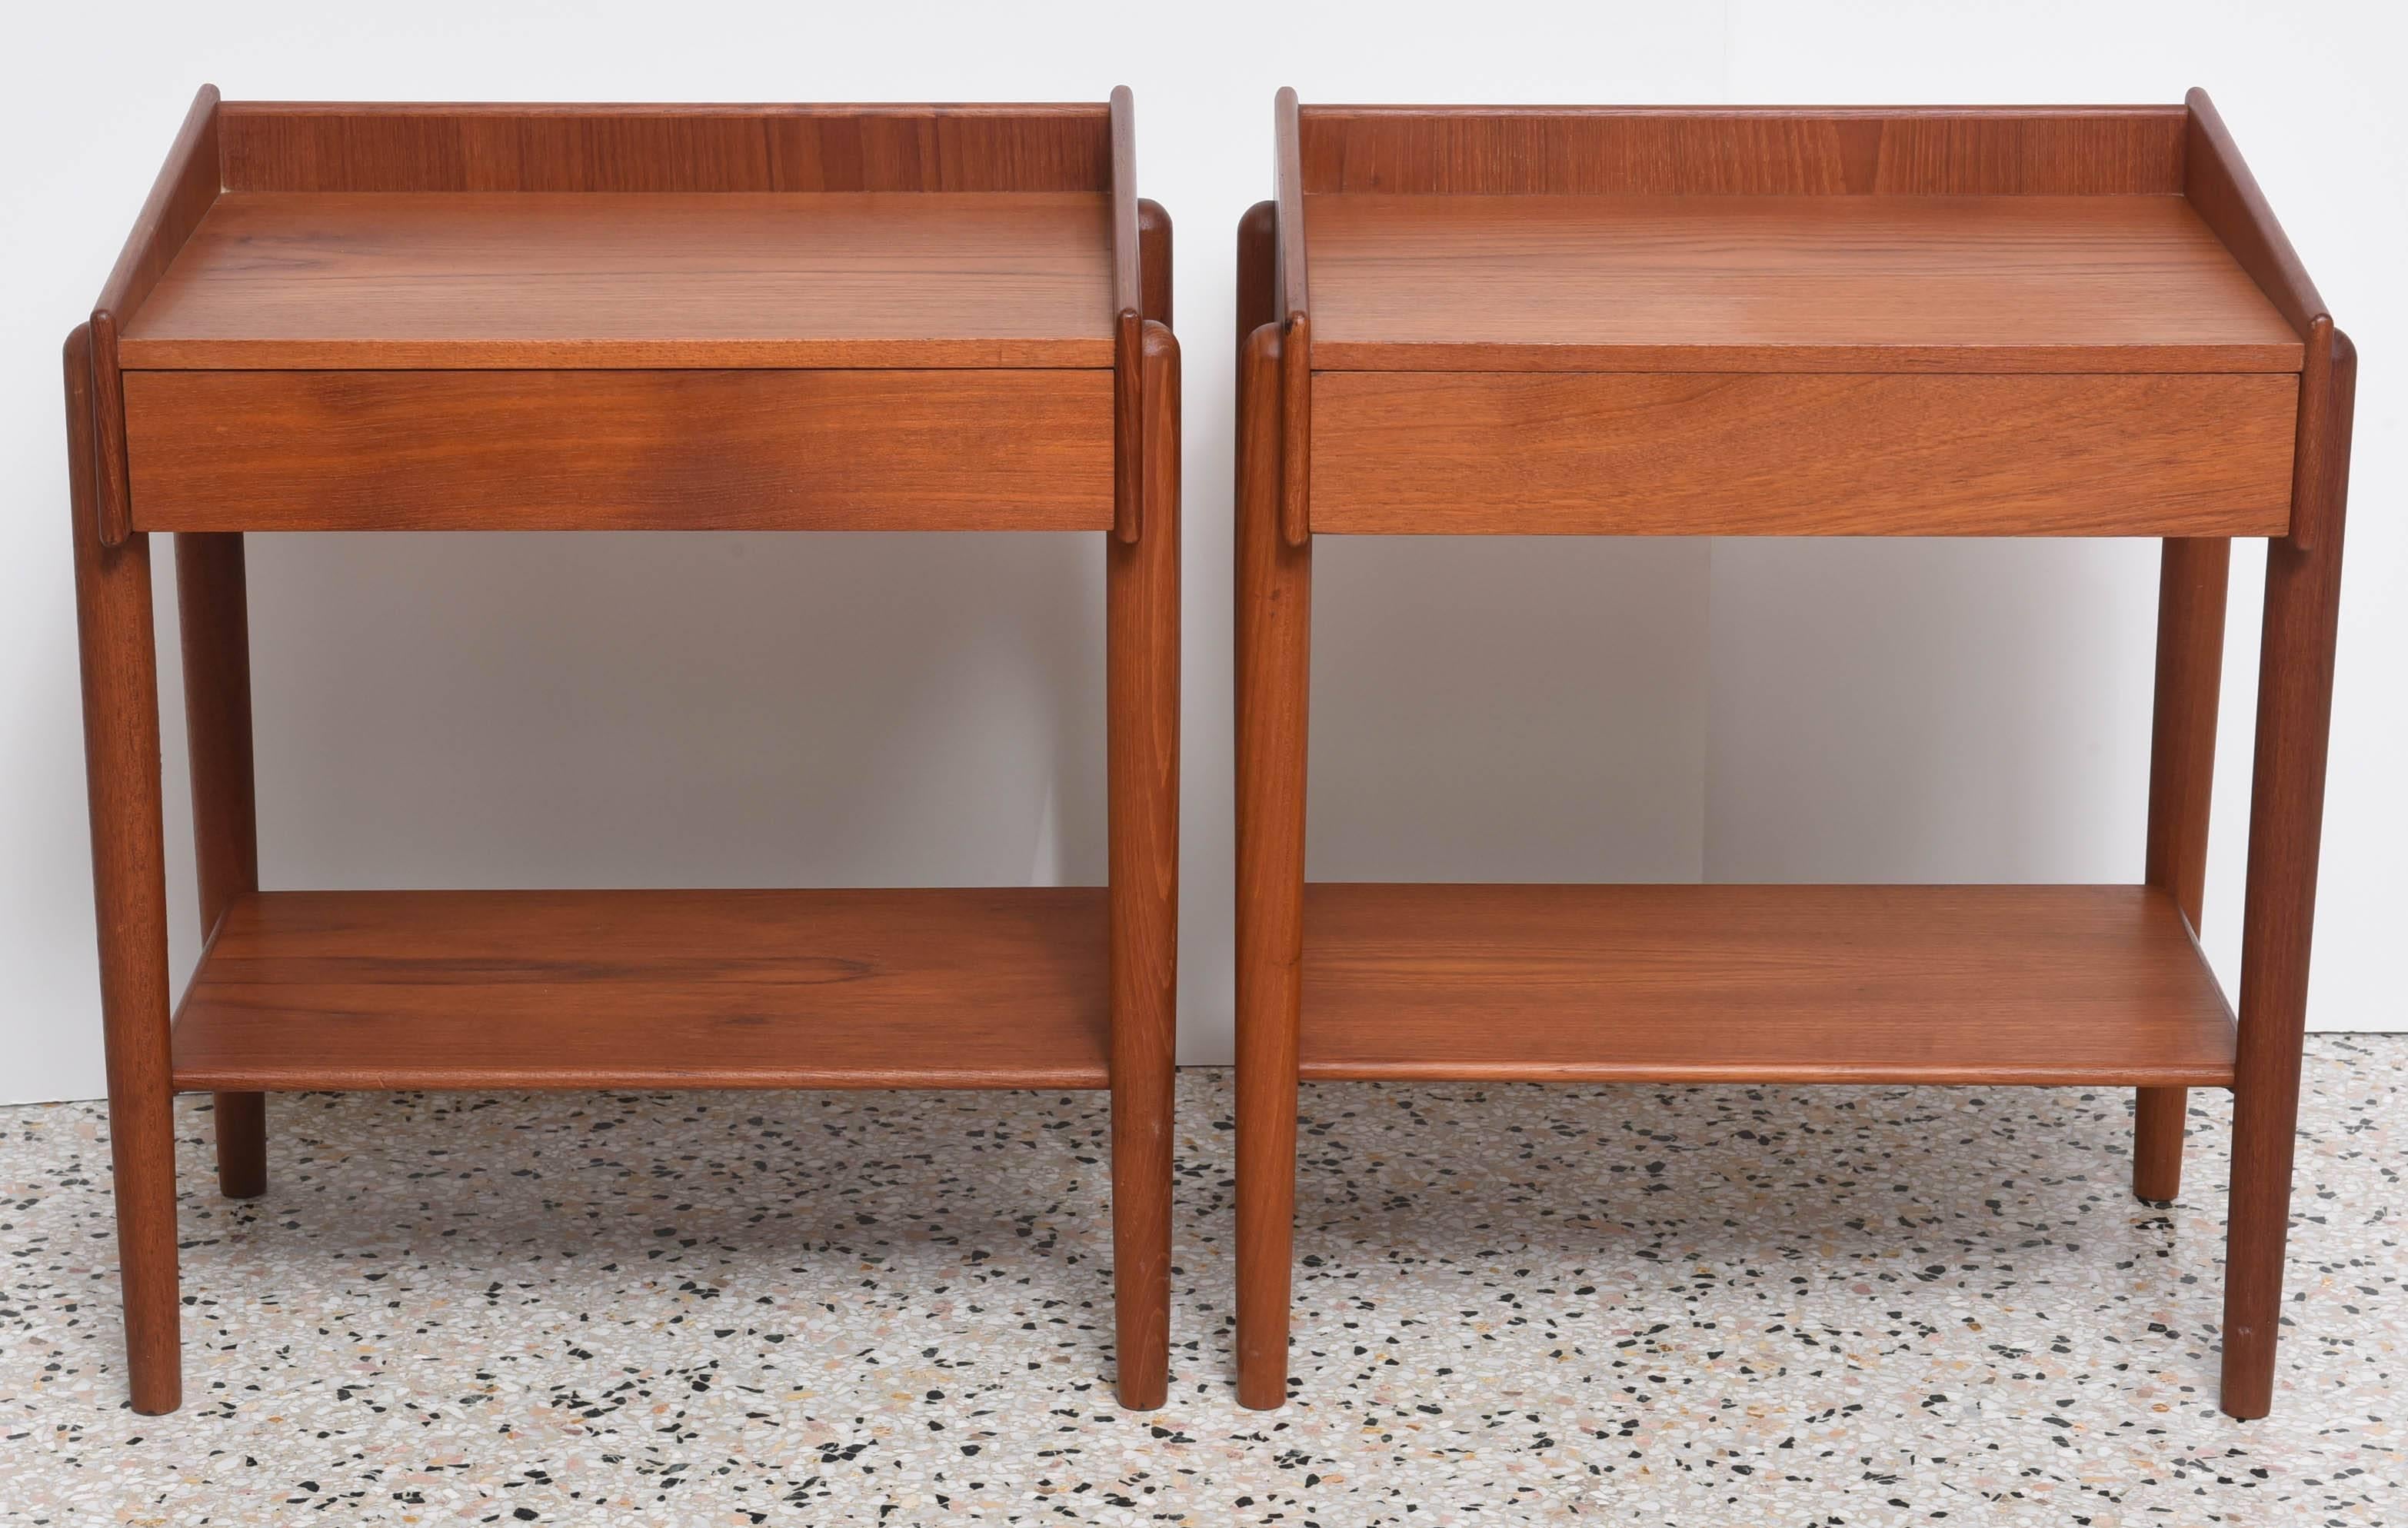 This pair of clean-lined teak bedside tables with a single flush-drawer were created in the 1960s by the iconic furniture designer Borge Mogensen for Soberg Moblefabrik.  

They are the ideal size for bedside tables in a small bedroom or as